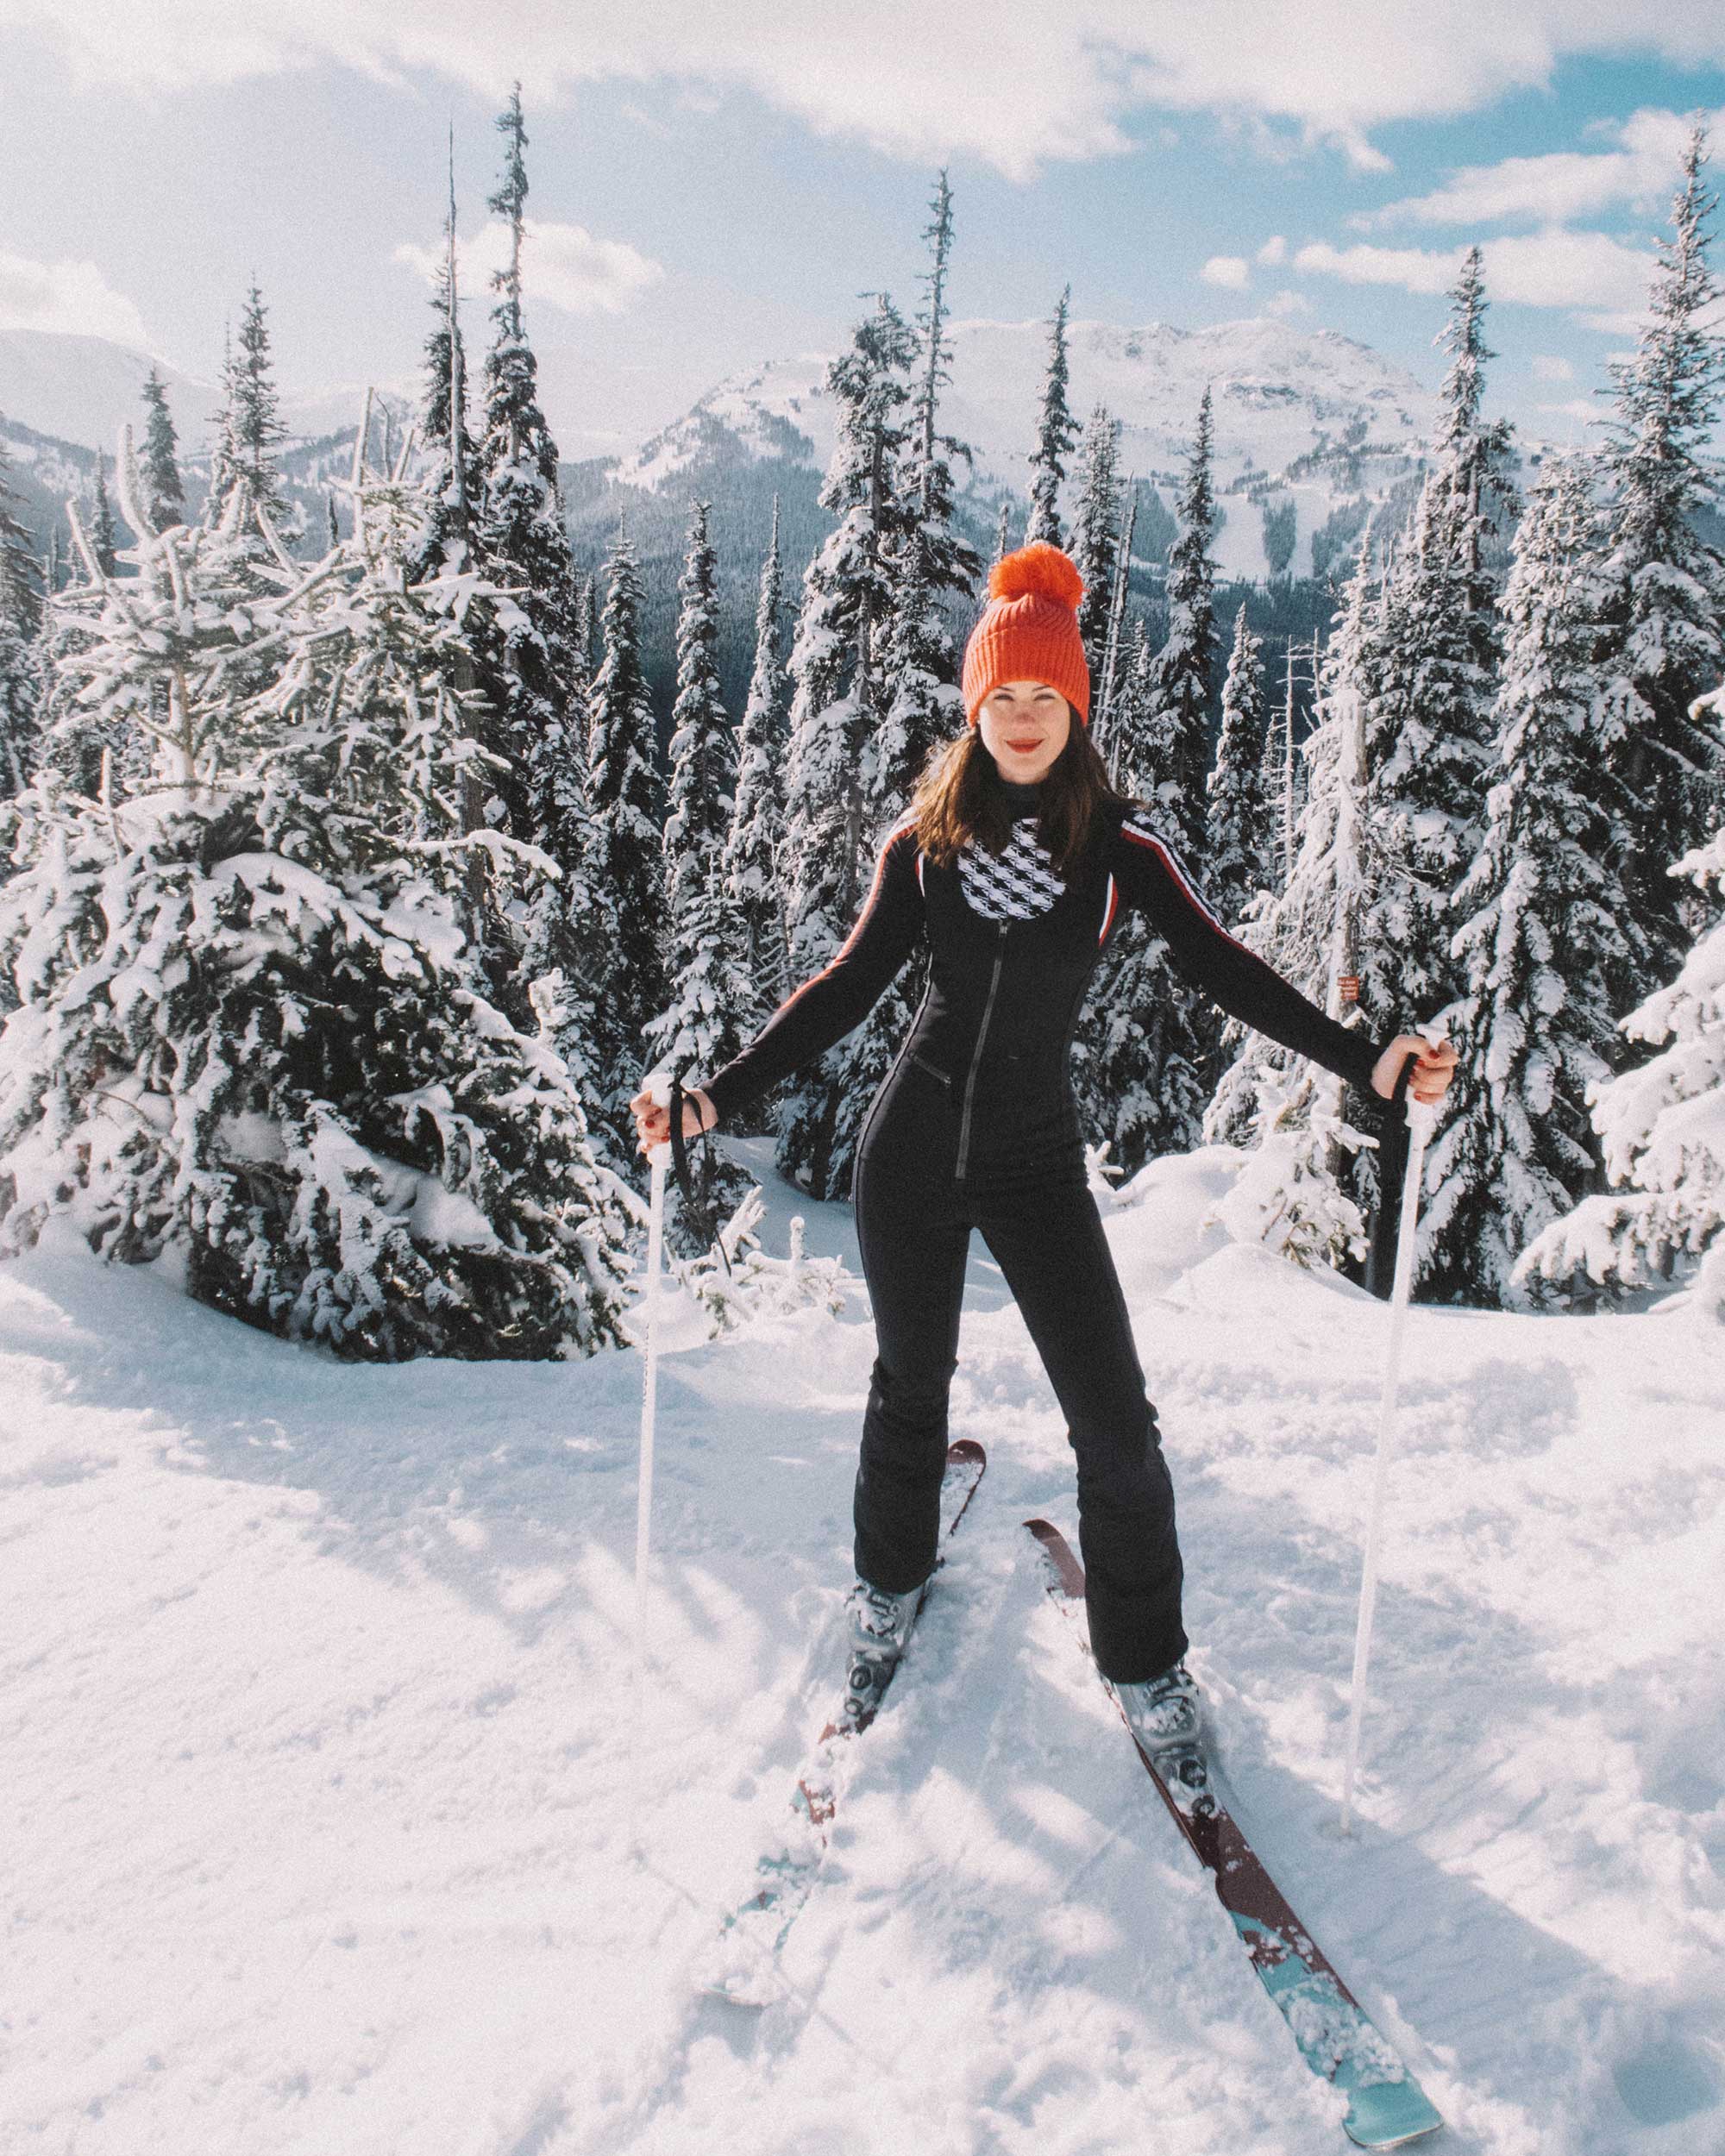 https://images.squarespace-cdn.com/content/v1/5a31d8f80abd04ad26528ca2/1546987399668-CR7I5LJ9JGK4UGS9PRRL/fashionable+chic+ski+outfit+whistler+canada+sweaty+betty+base+layer2.jpg